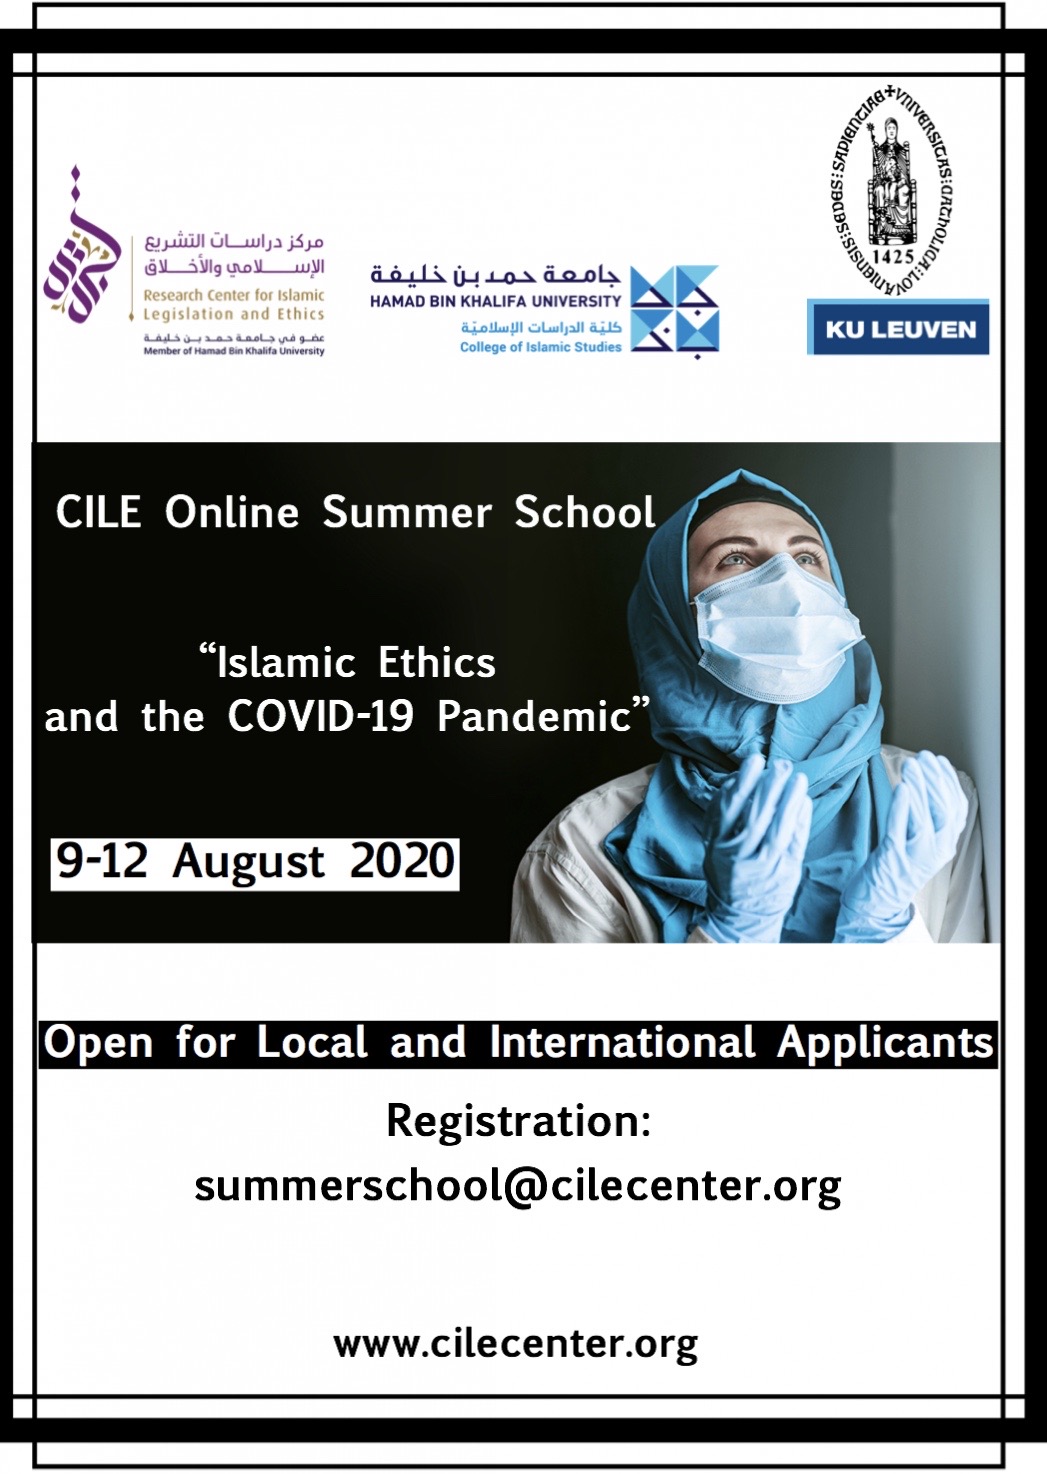 CILE Online Summer School 2020 "Islamic Ethics and the Covid-19 Pandemic"